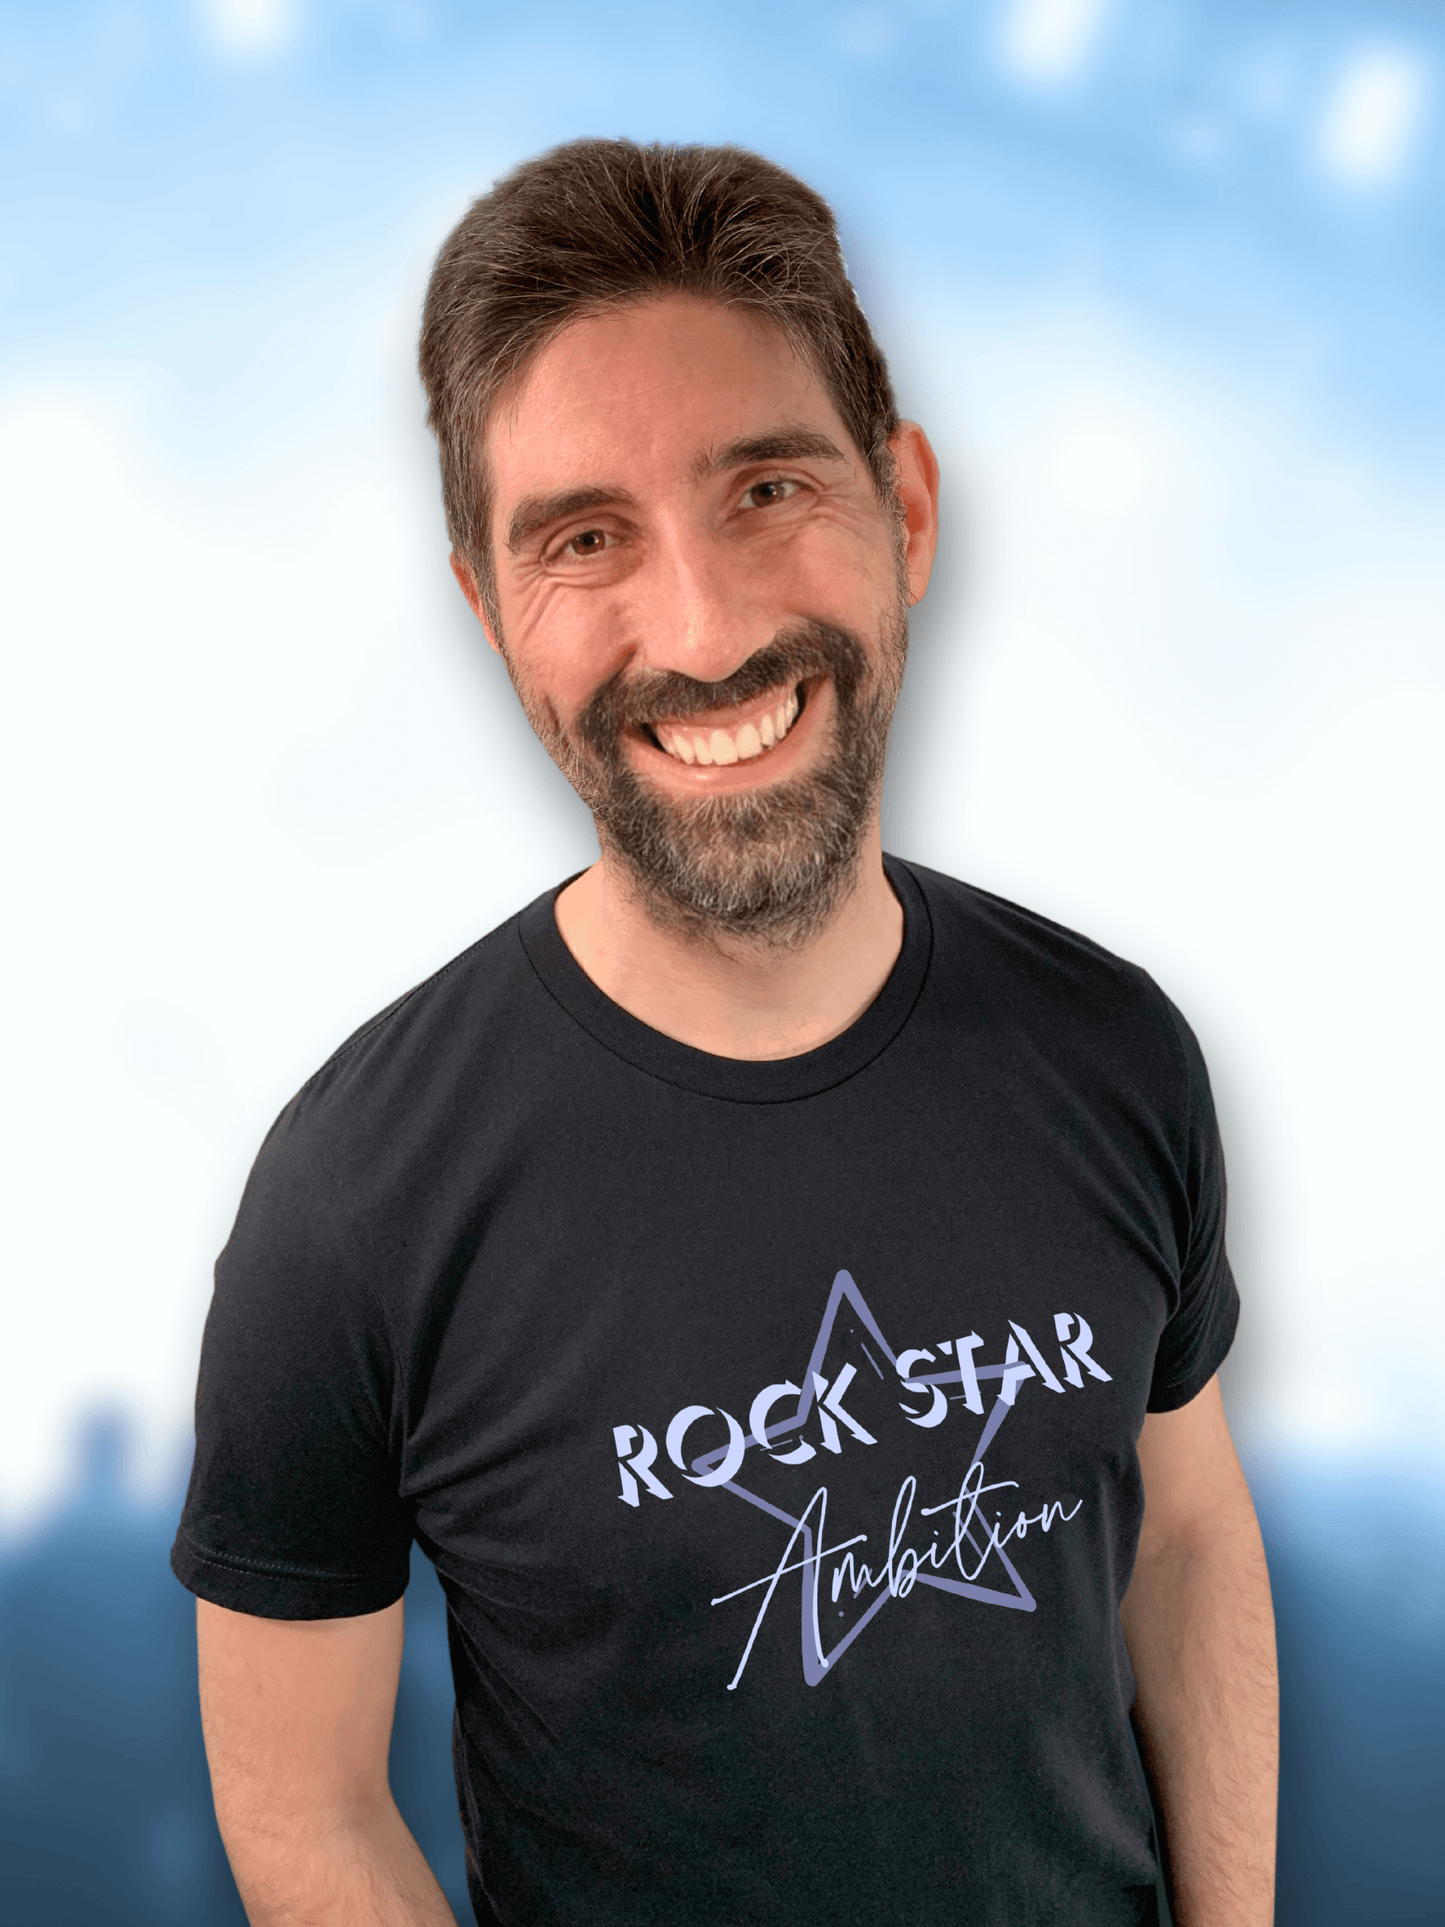 Concert background with Man wearing mens black short sleeve graphic tshirt. Crew neck casual wear. Band Tee Design is mid purple star outline behind wording ROCK STAR in upper case shadowed light grey/purple text, then Ambition below in script. Rock music themed unisex top